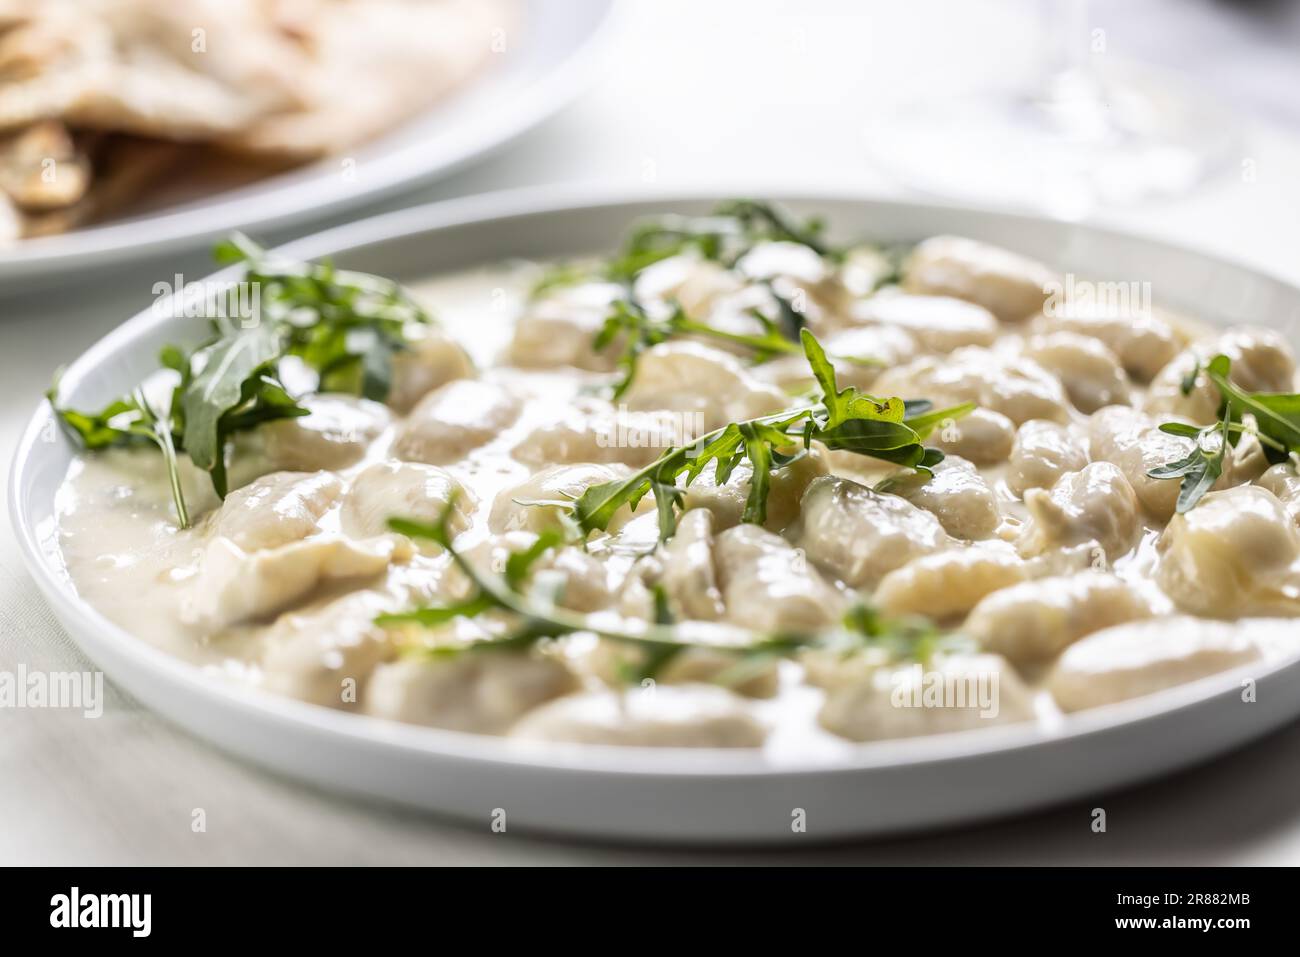 Gnocchi ai quattro formaggi, Italian dough pasta with four types of cheese and ruccola on top. Stock Photo